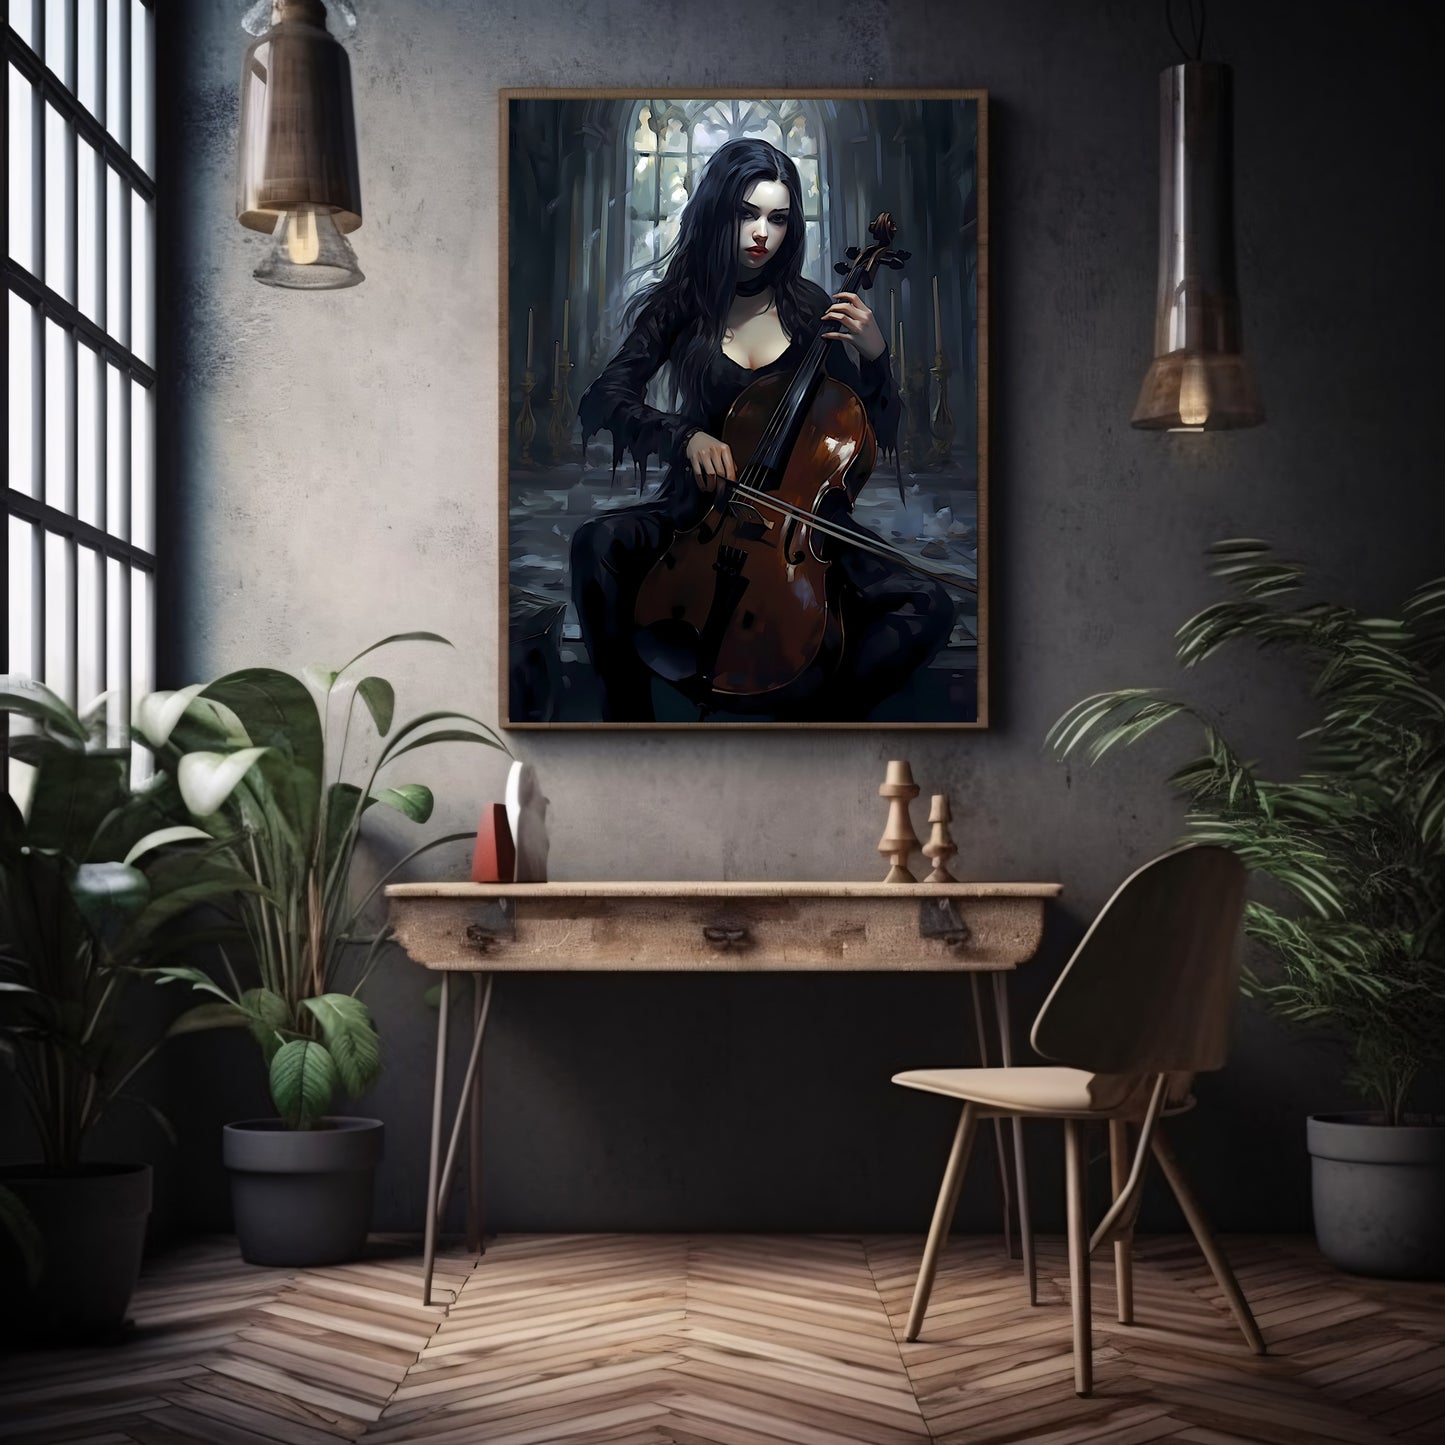 Goth Girl playing Cello on a Wednesday Paper Poster Prints Dark Spooky Decor Fantasy Poster Dark Academia Dark Cottagecore Gothic Retro Ghost Wall Art Wicca